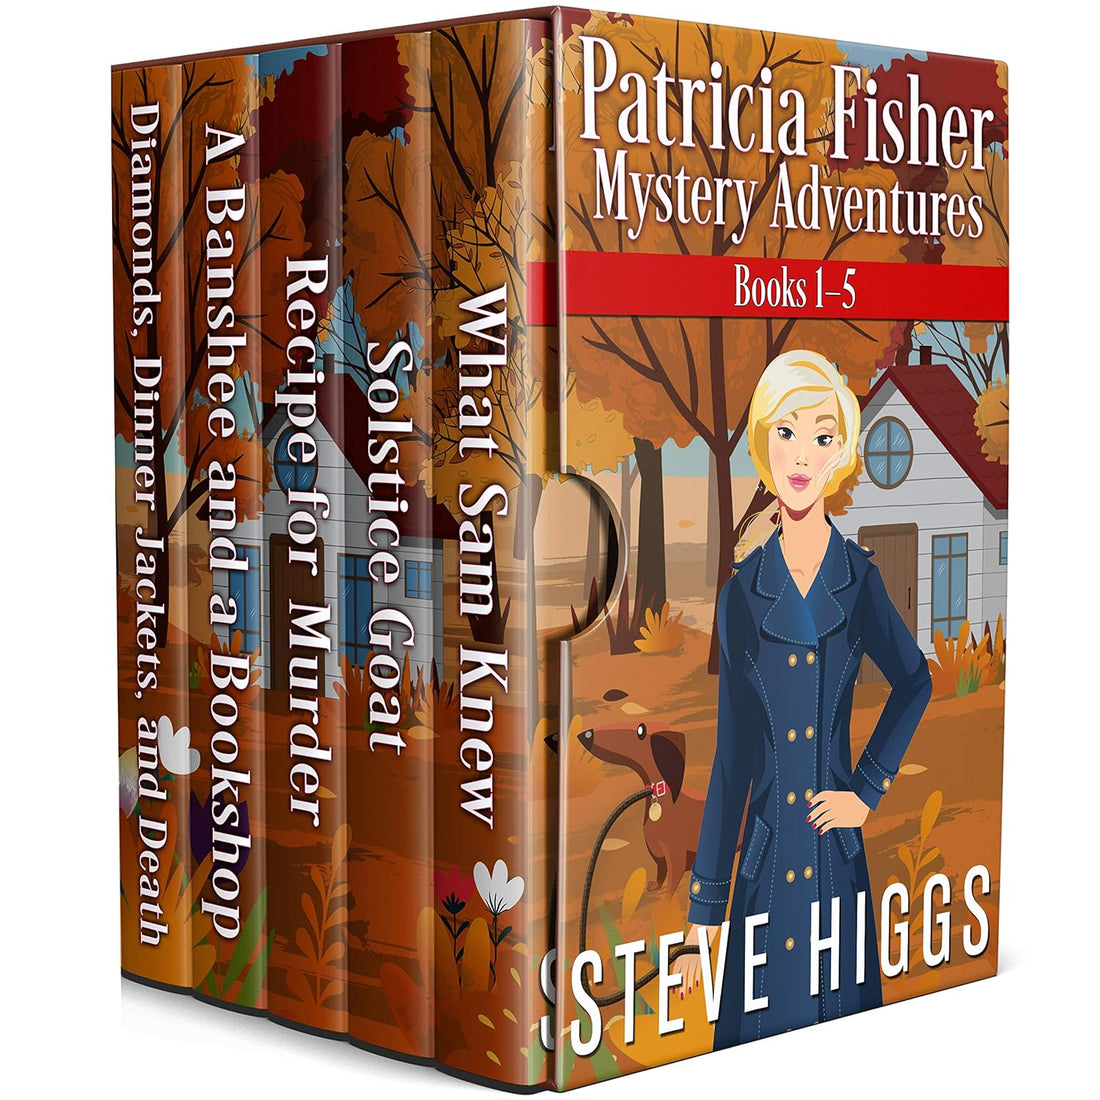 Recipe for Murder : Patricia Fisher Mystery Adventures Book 3